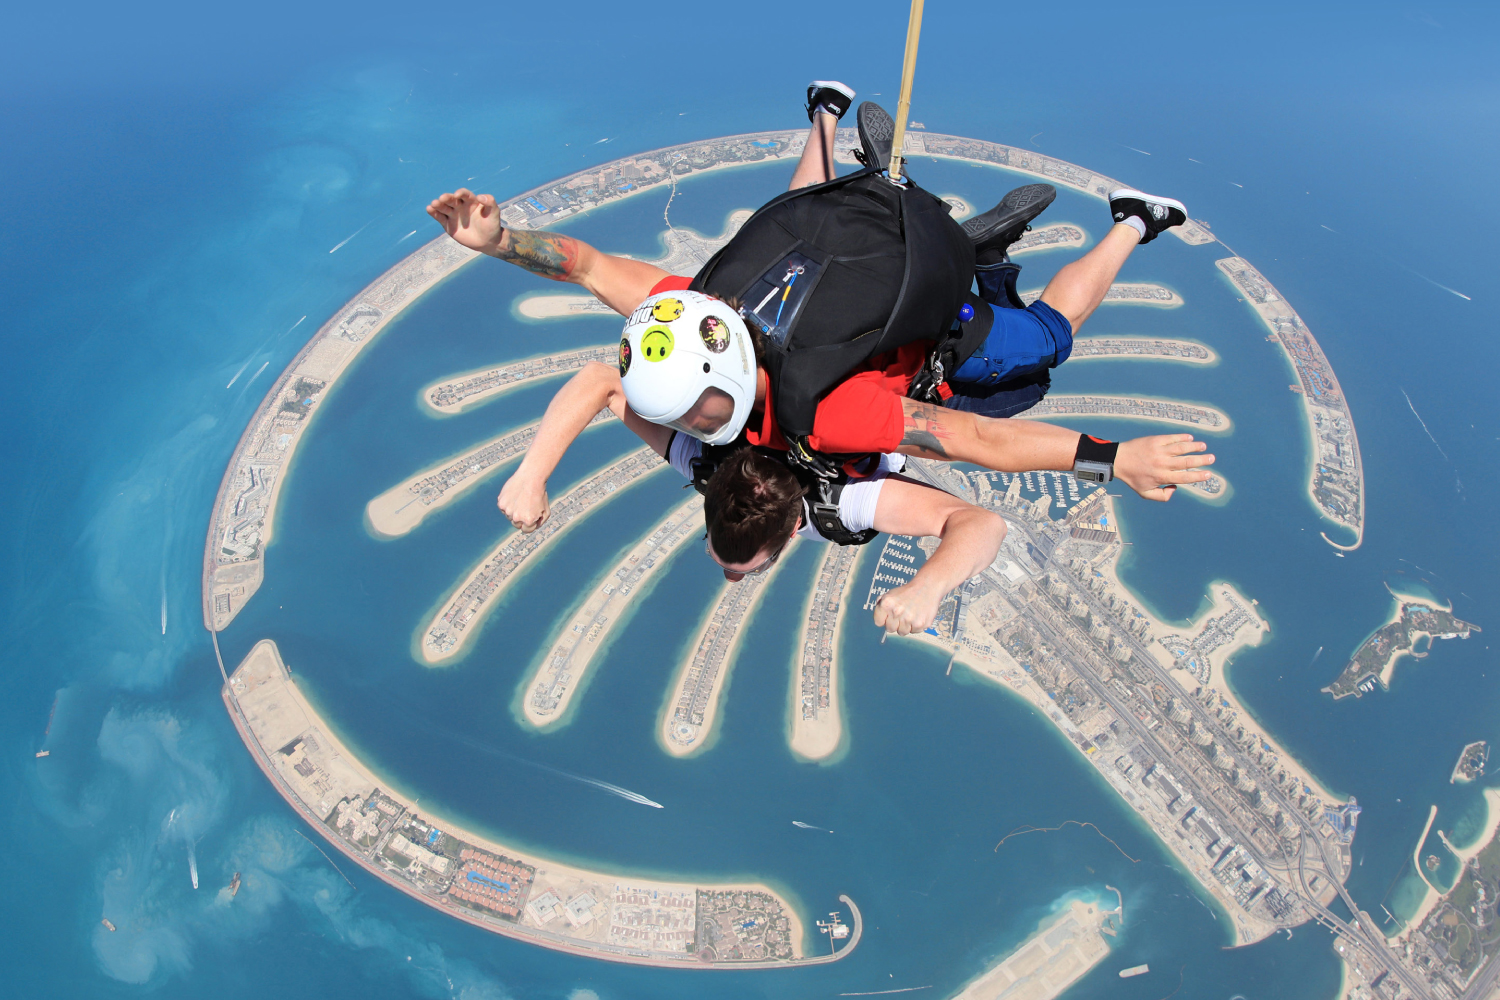 Why you need to check out Skydive Dubai | Attractions | Time Out Dubai